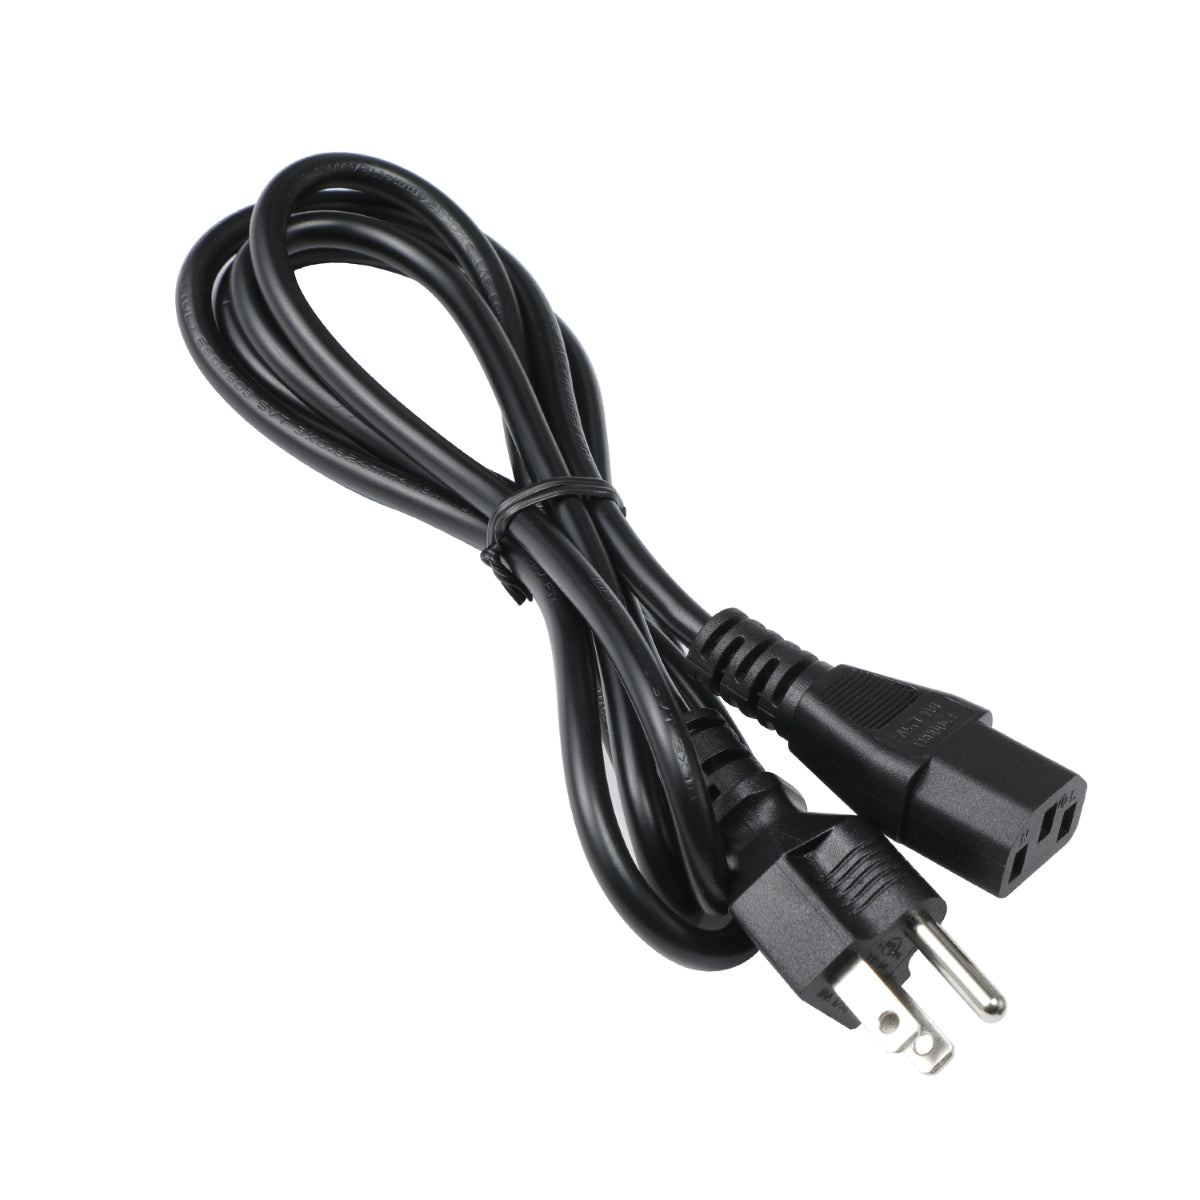 Power Cable for Philips 275B1 Monitor.